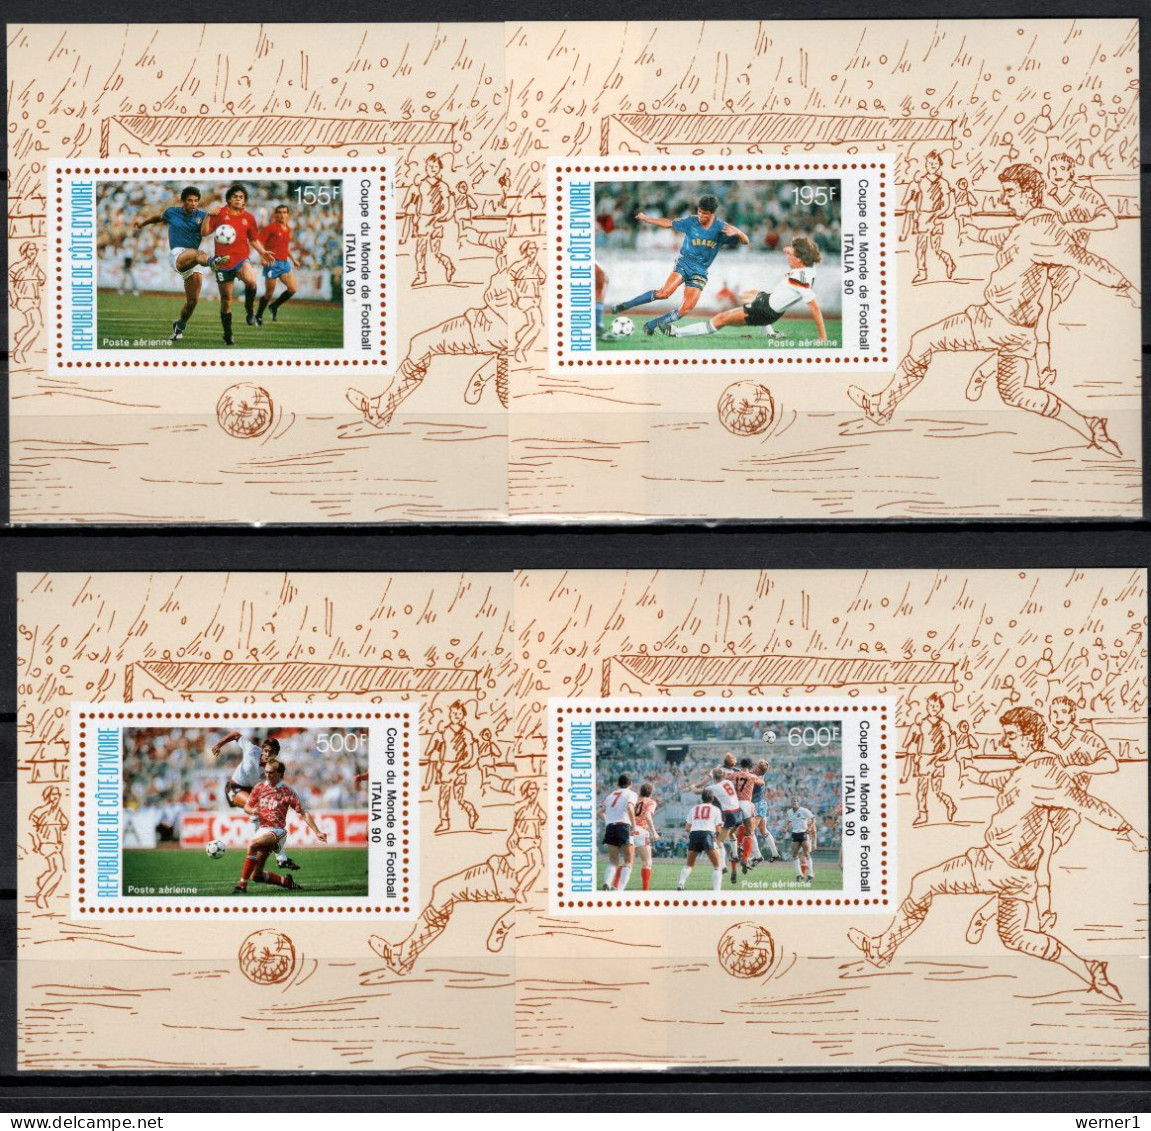 Ivory Coast 1990 Football Soccer World Cup Set Of 4 S/s Imperf. MNH -scarce- - 1990 – Italy